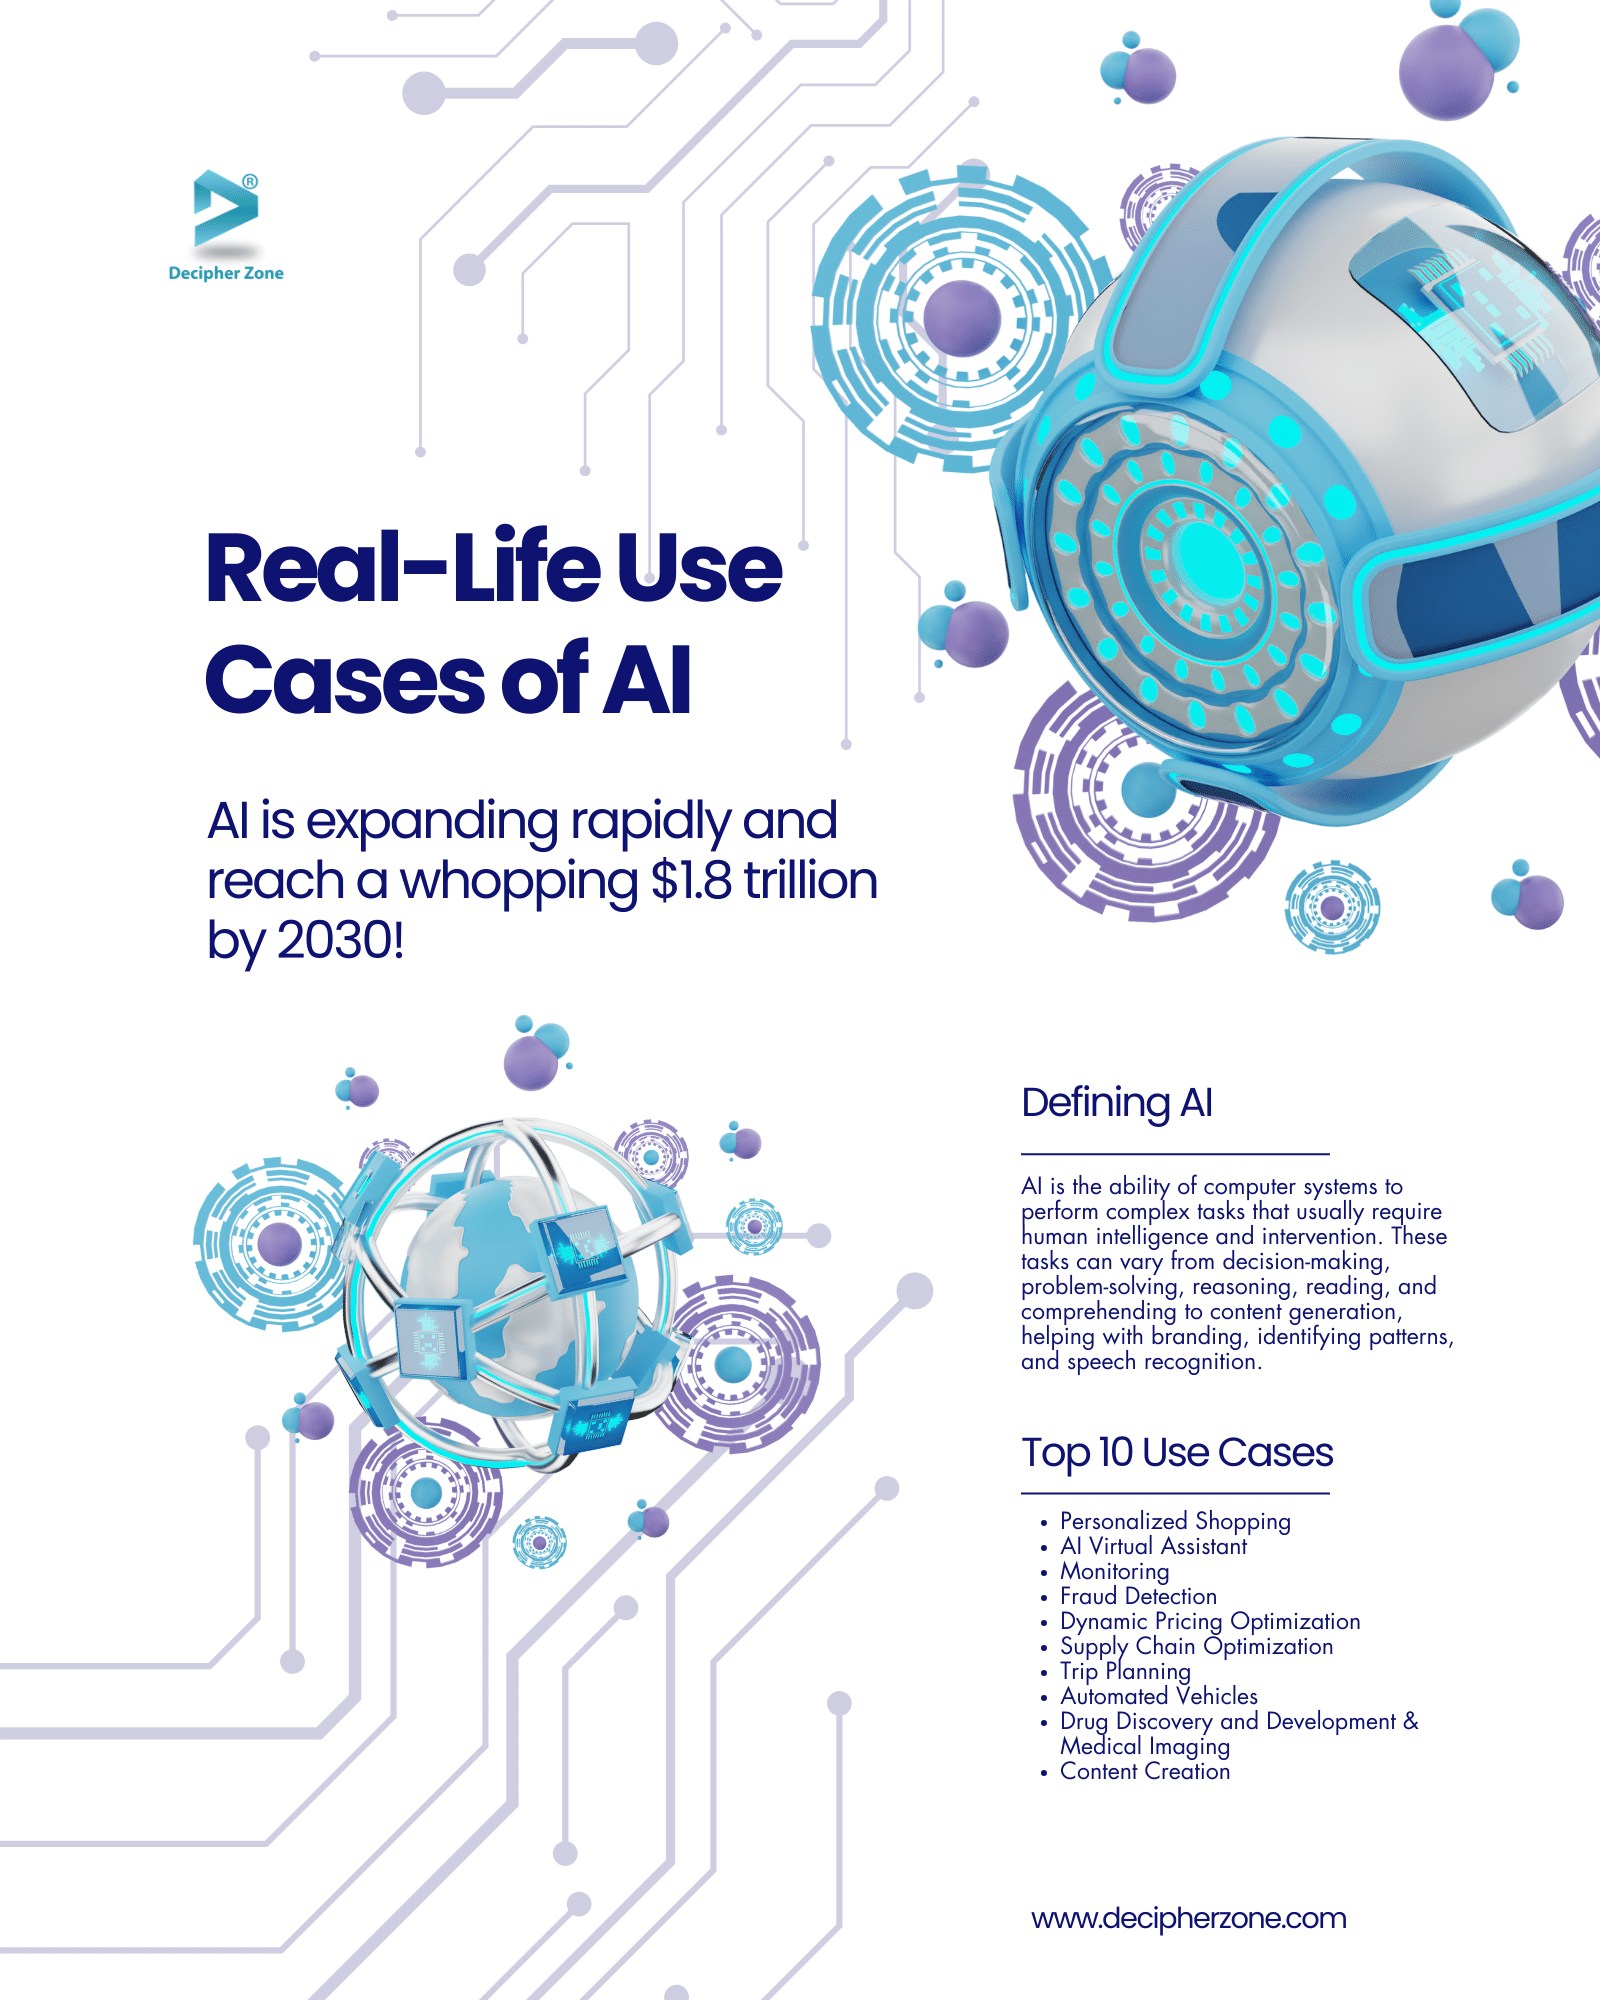 Real Life use cases of AI